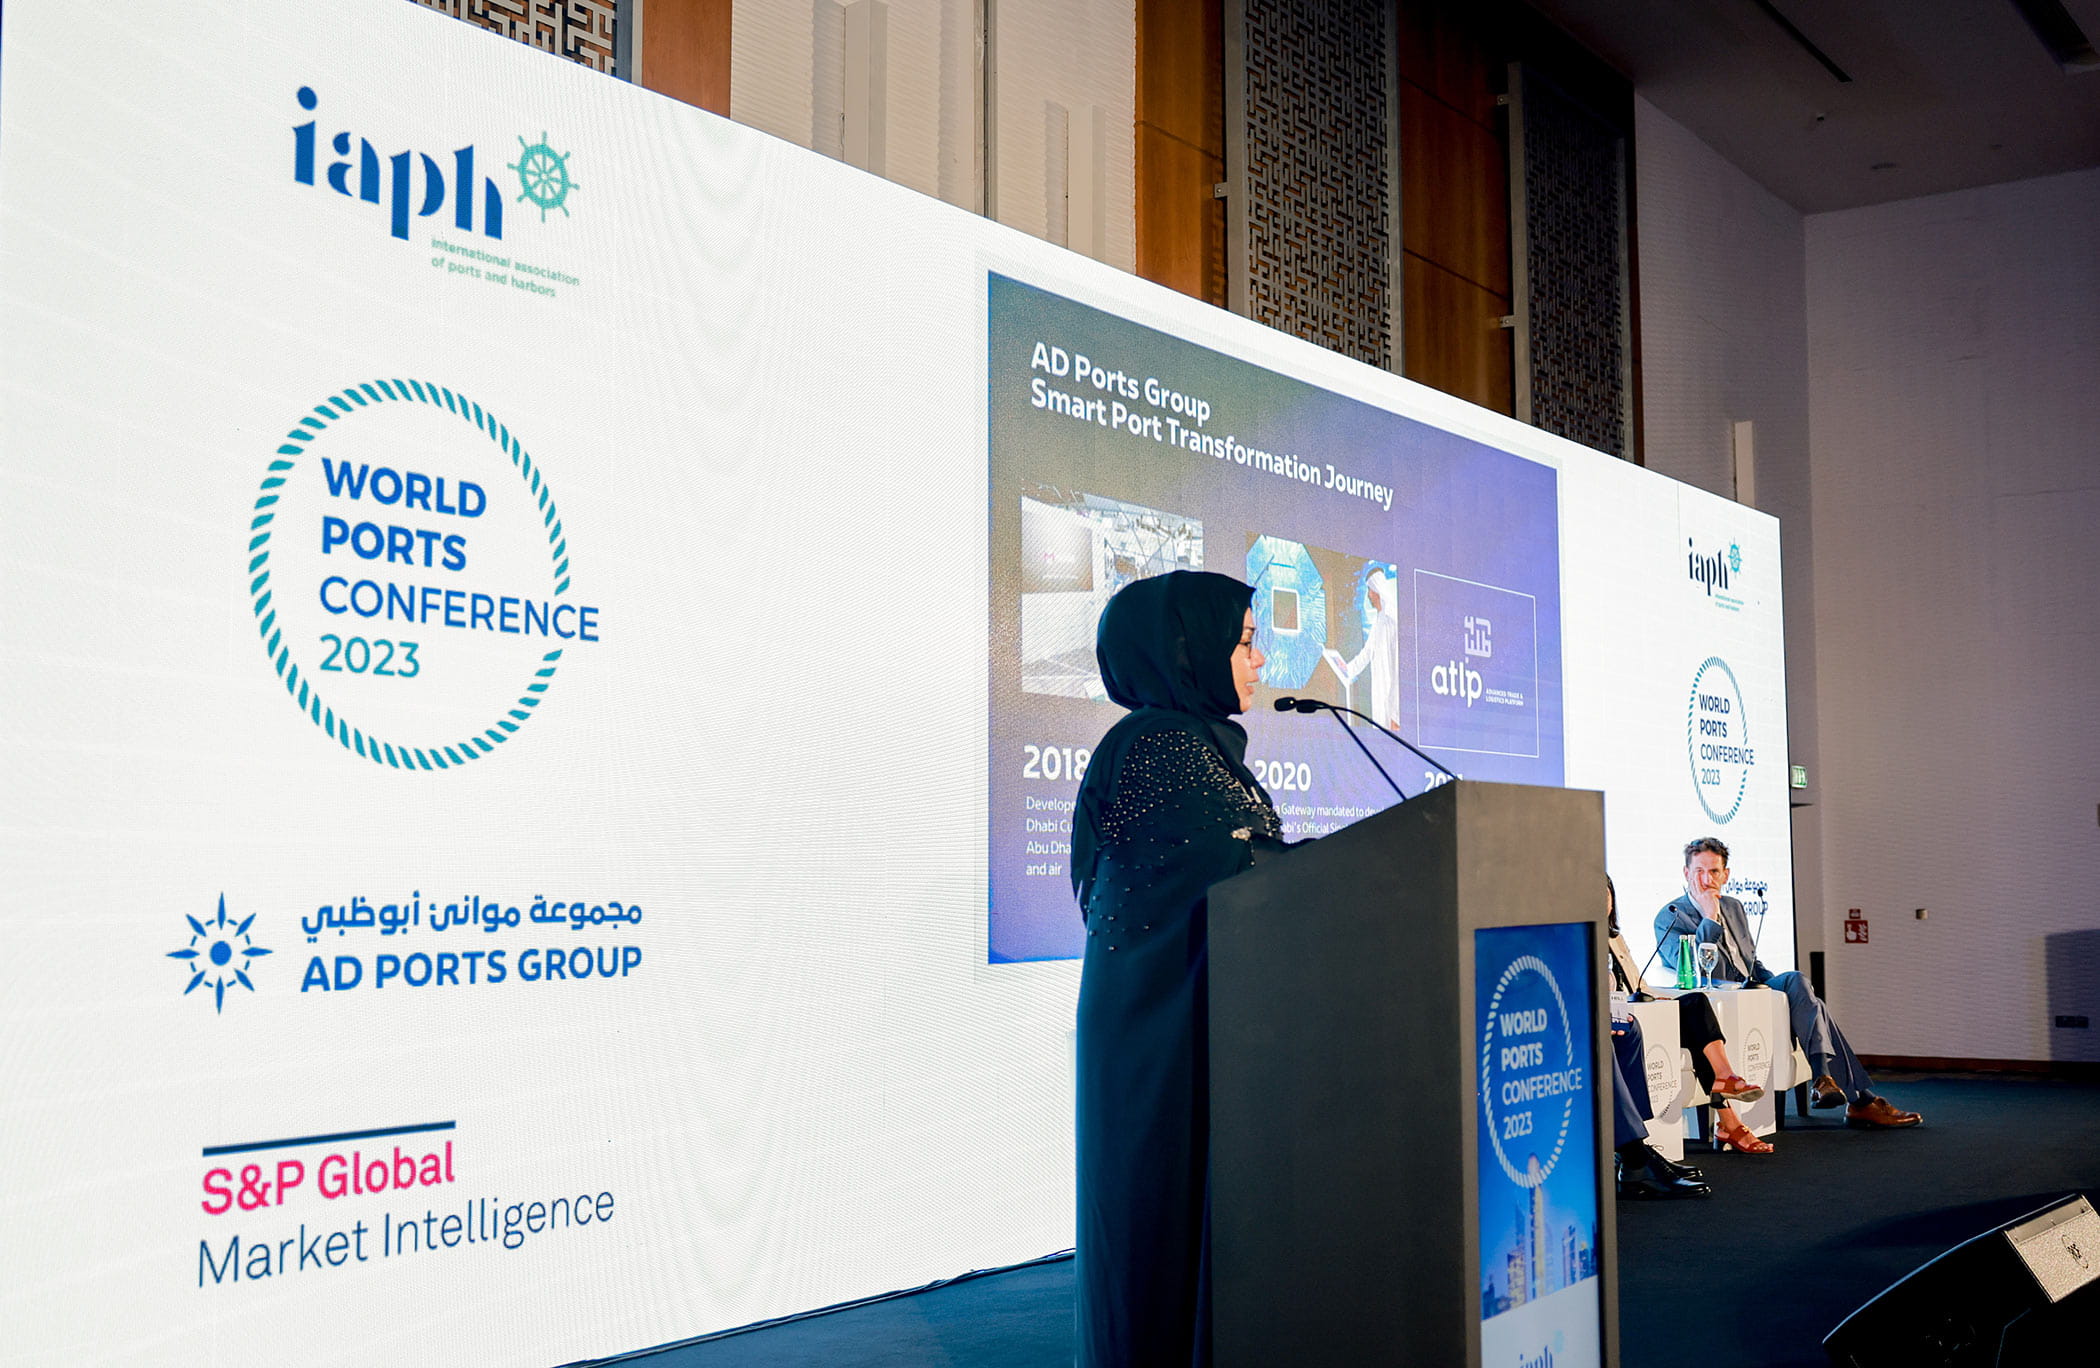 Day Two of World Ports Conference 2023 in Abu Dhabi showcases latest trends in decarbonisation and digital transformation